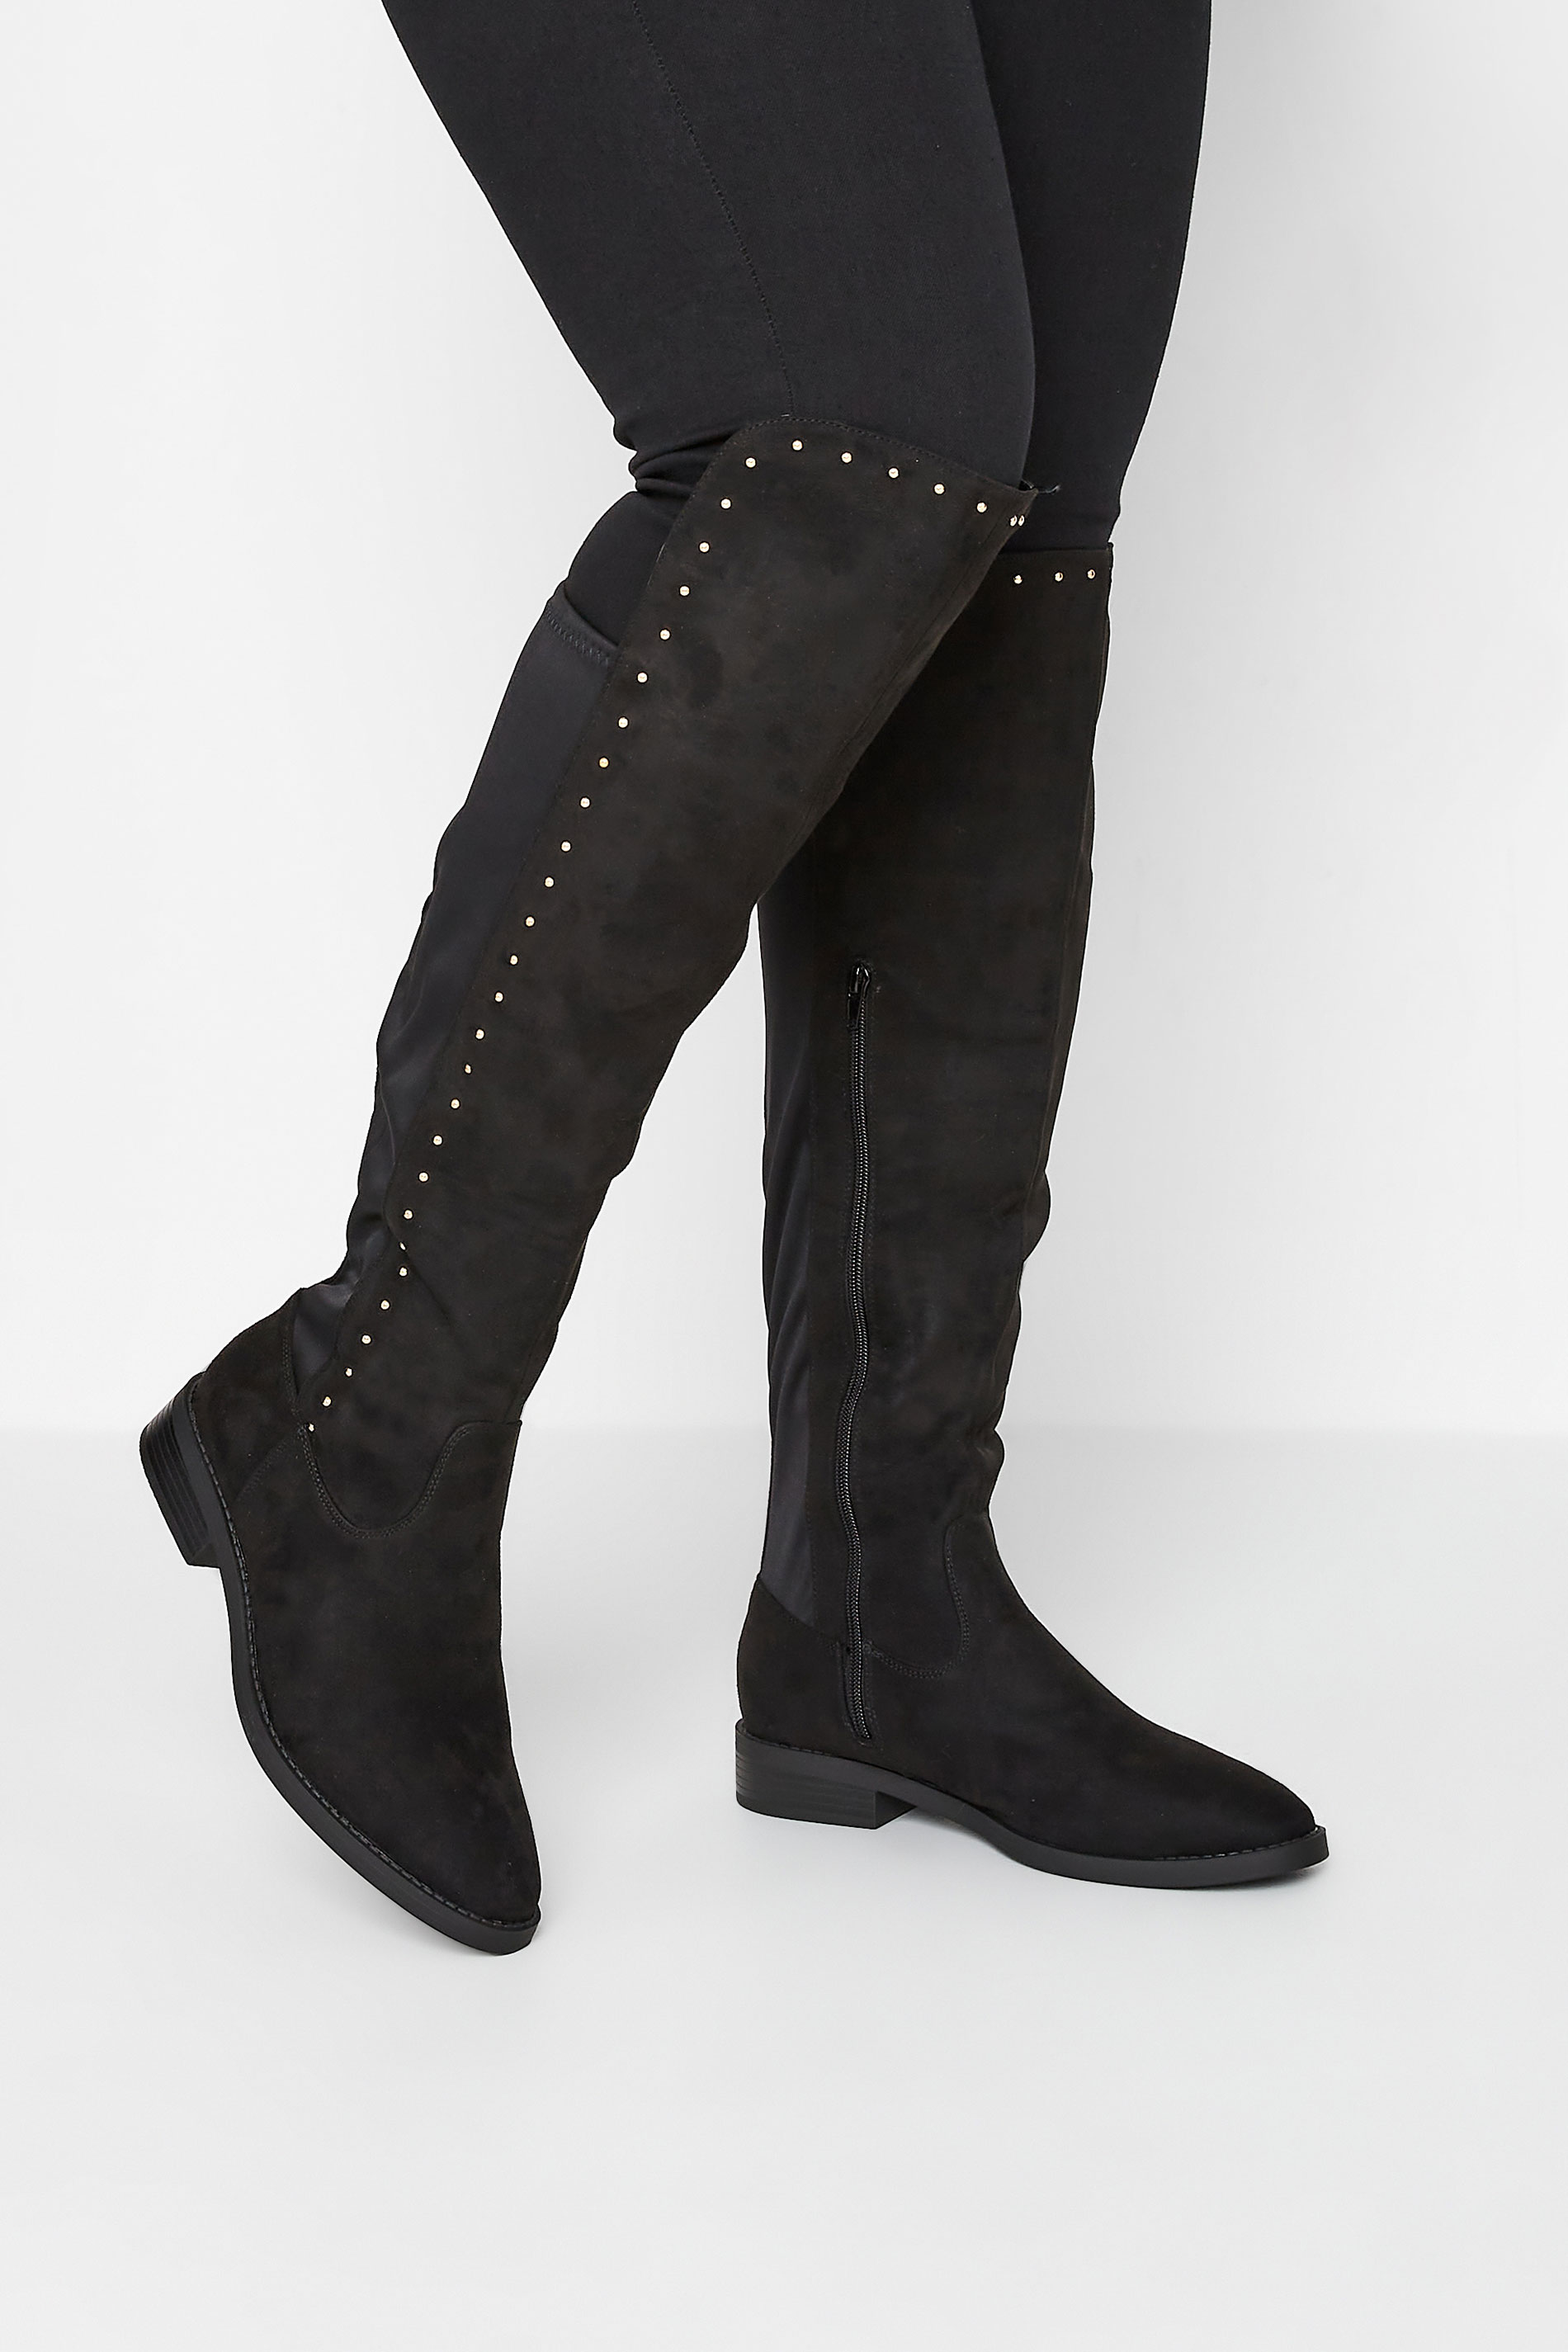 LIMITED COLLECTION Black Stud Over The Knee Boots In Wide E Fit & Extra Wide Fit | Yours Clothing 1